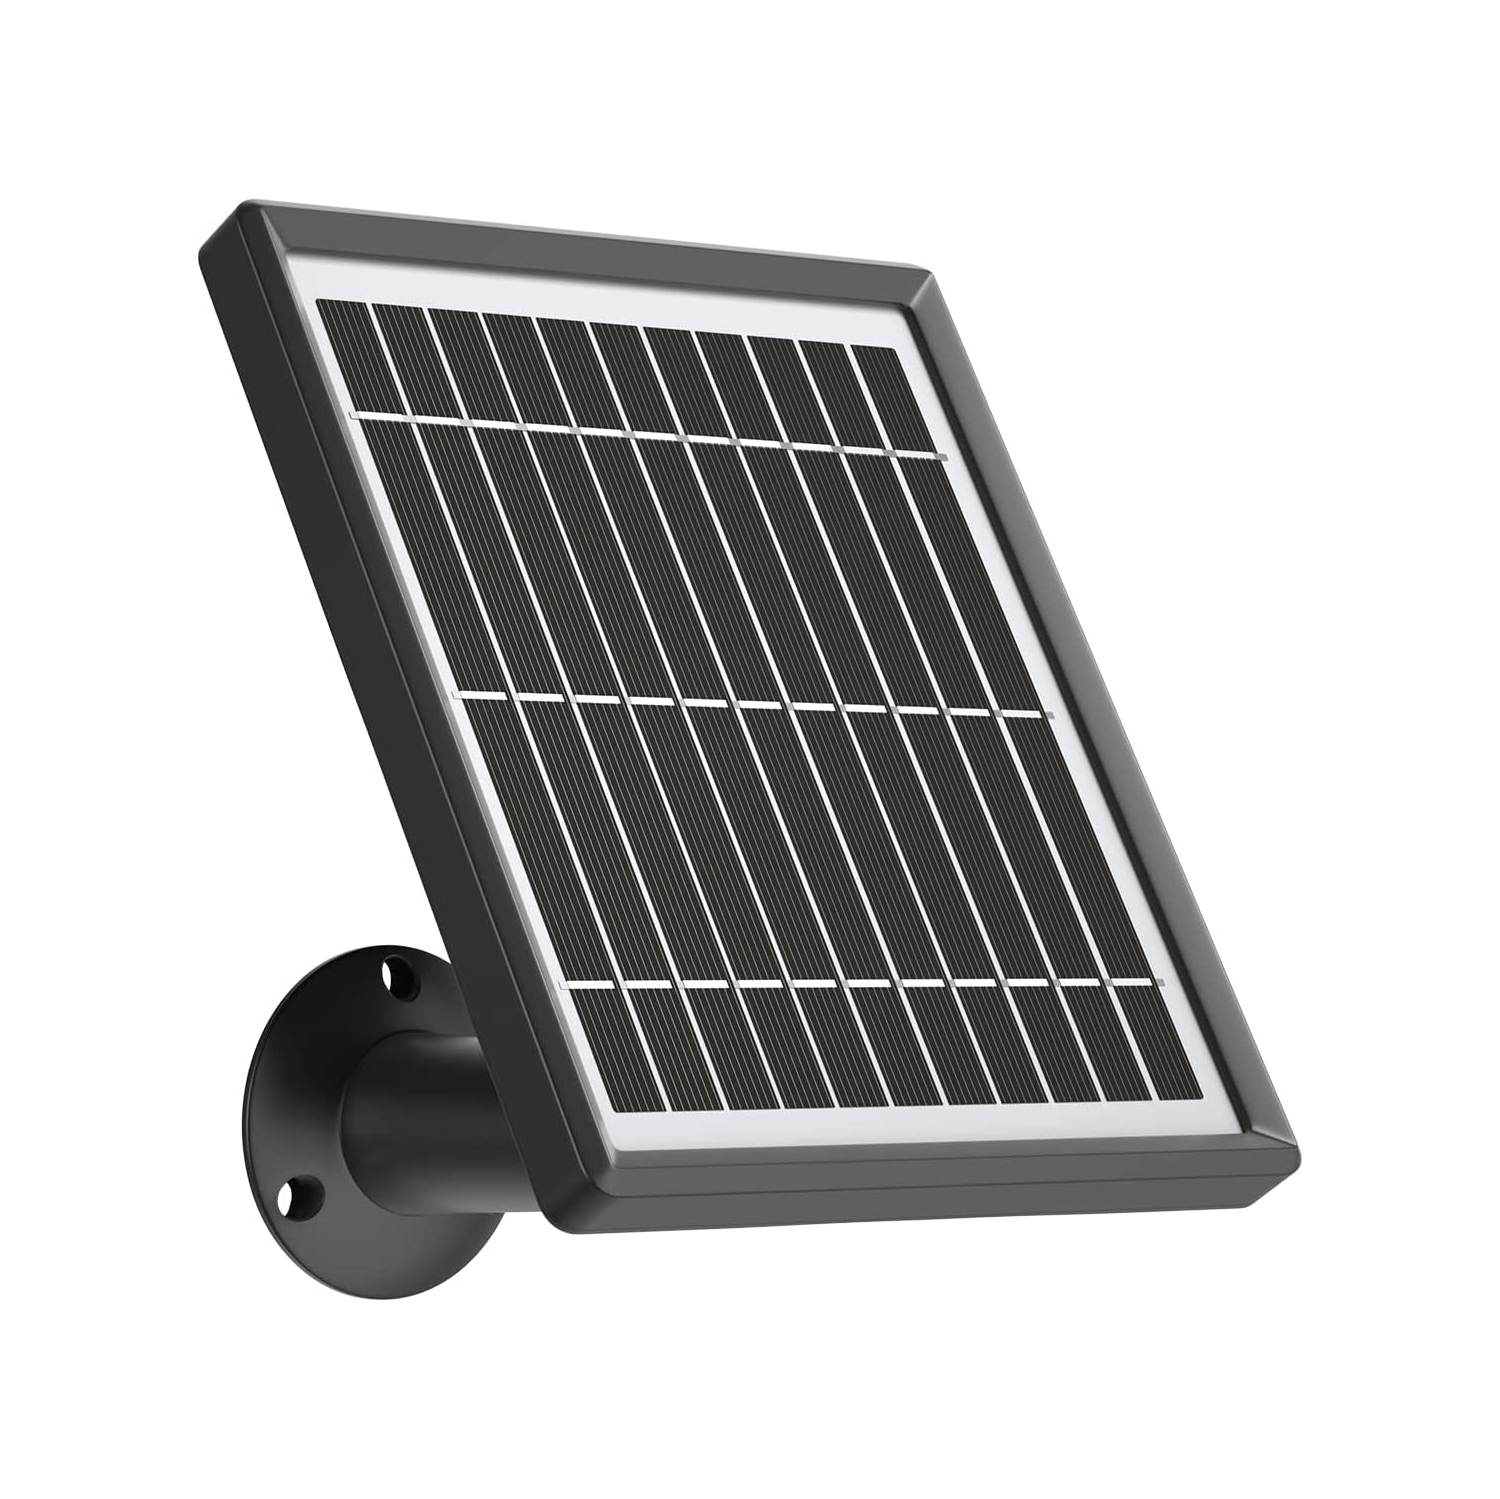 ZOSI IP66 Waterproof Solar Panel with 360° Adjustable Mounting Bracket, Non-Stop Charging Power Supply, Only Work for ZOSI C306 Wire-Free Battery Security Camera